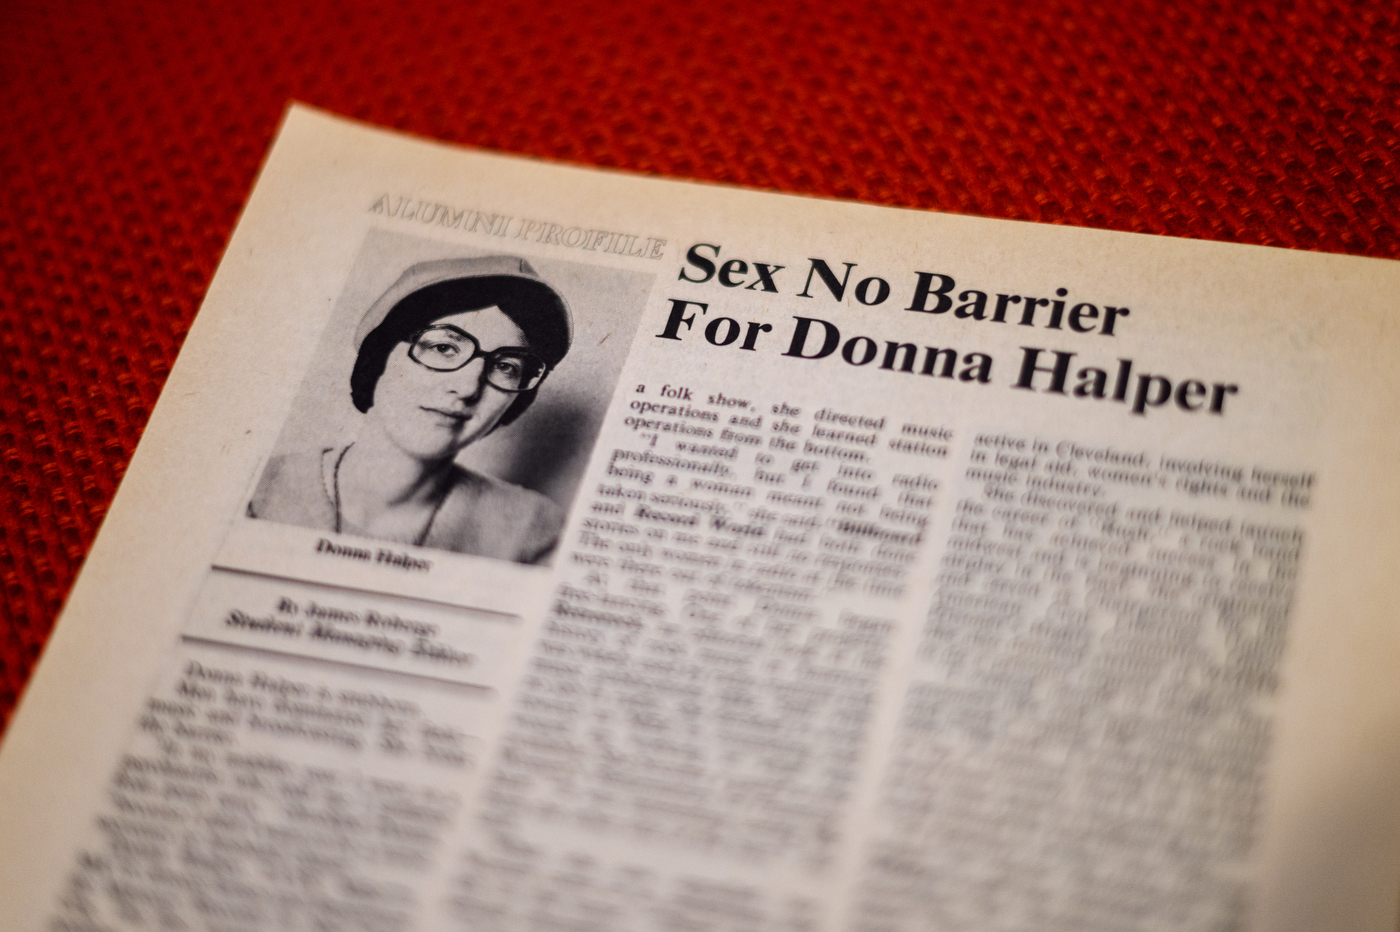 print newspaper article with the headline "Sex No Barrier for Donna Halper"